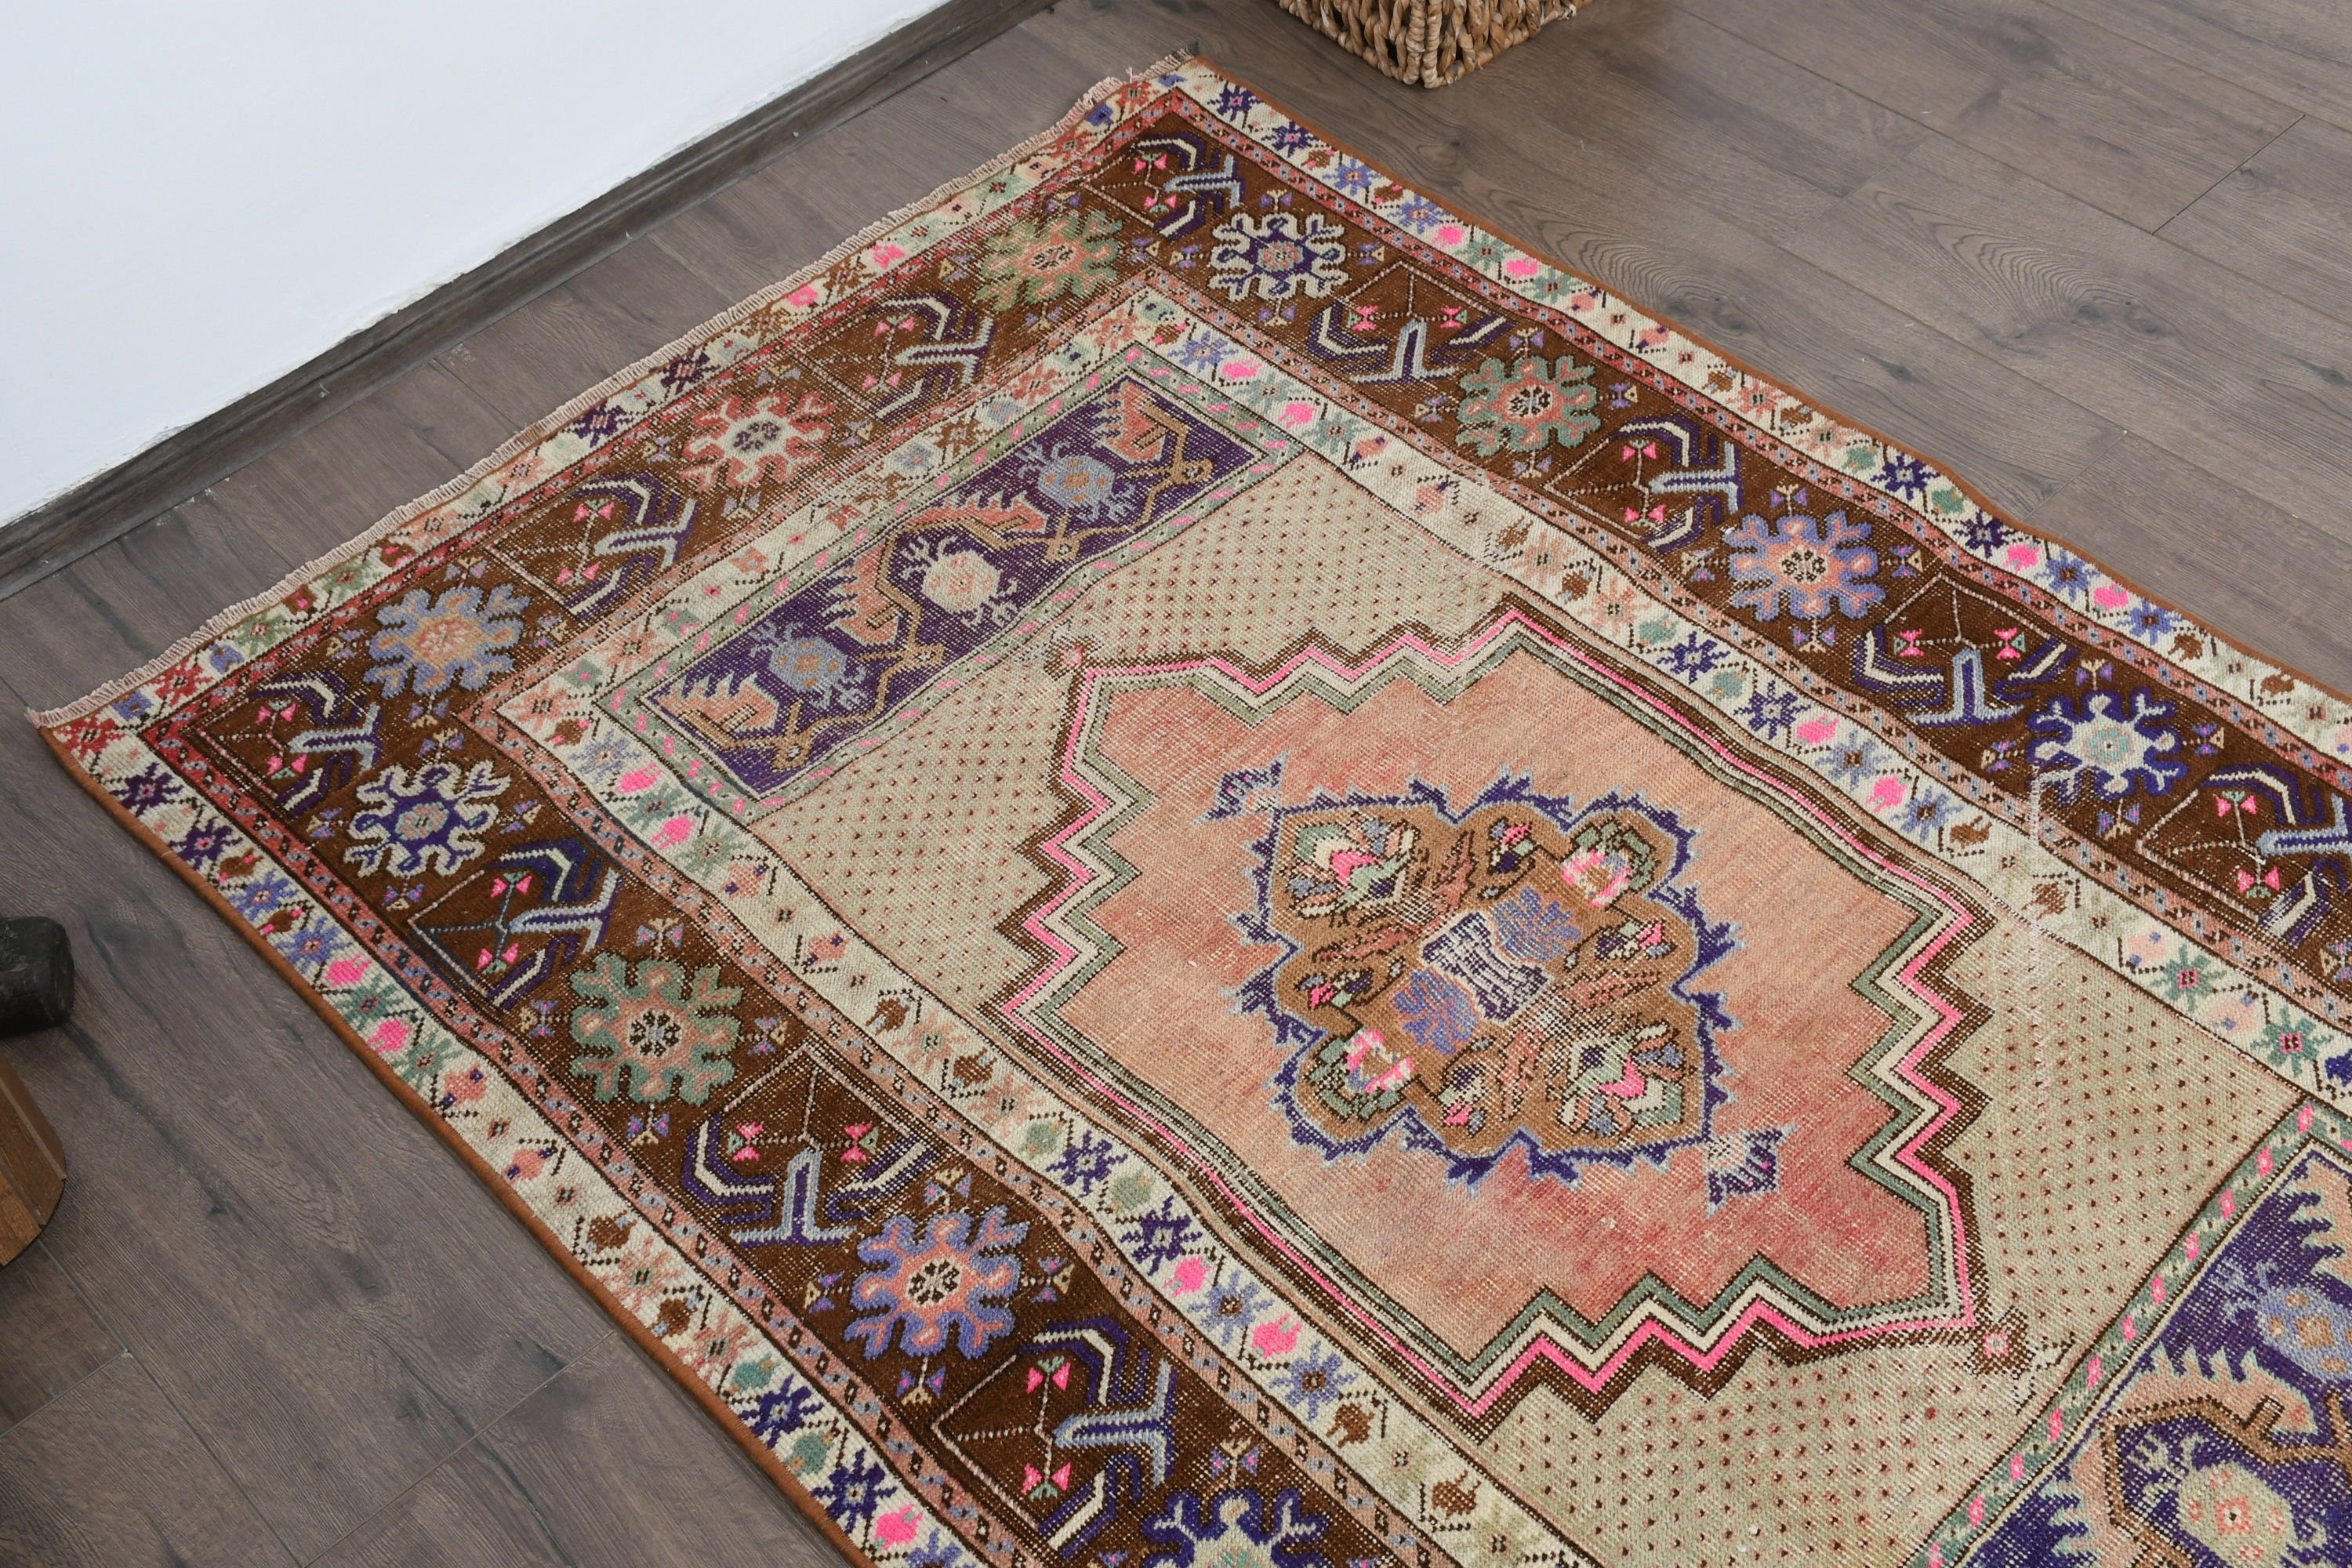 Eclectic Rug, 3.3x5.2 ft Accent Rug, Turkish Rug, Vintage Rug, Brown Anatolian Rugs, Bedroom Rug, Moroccan Rugs, Entry Rug, Antique Rug